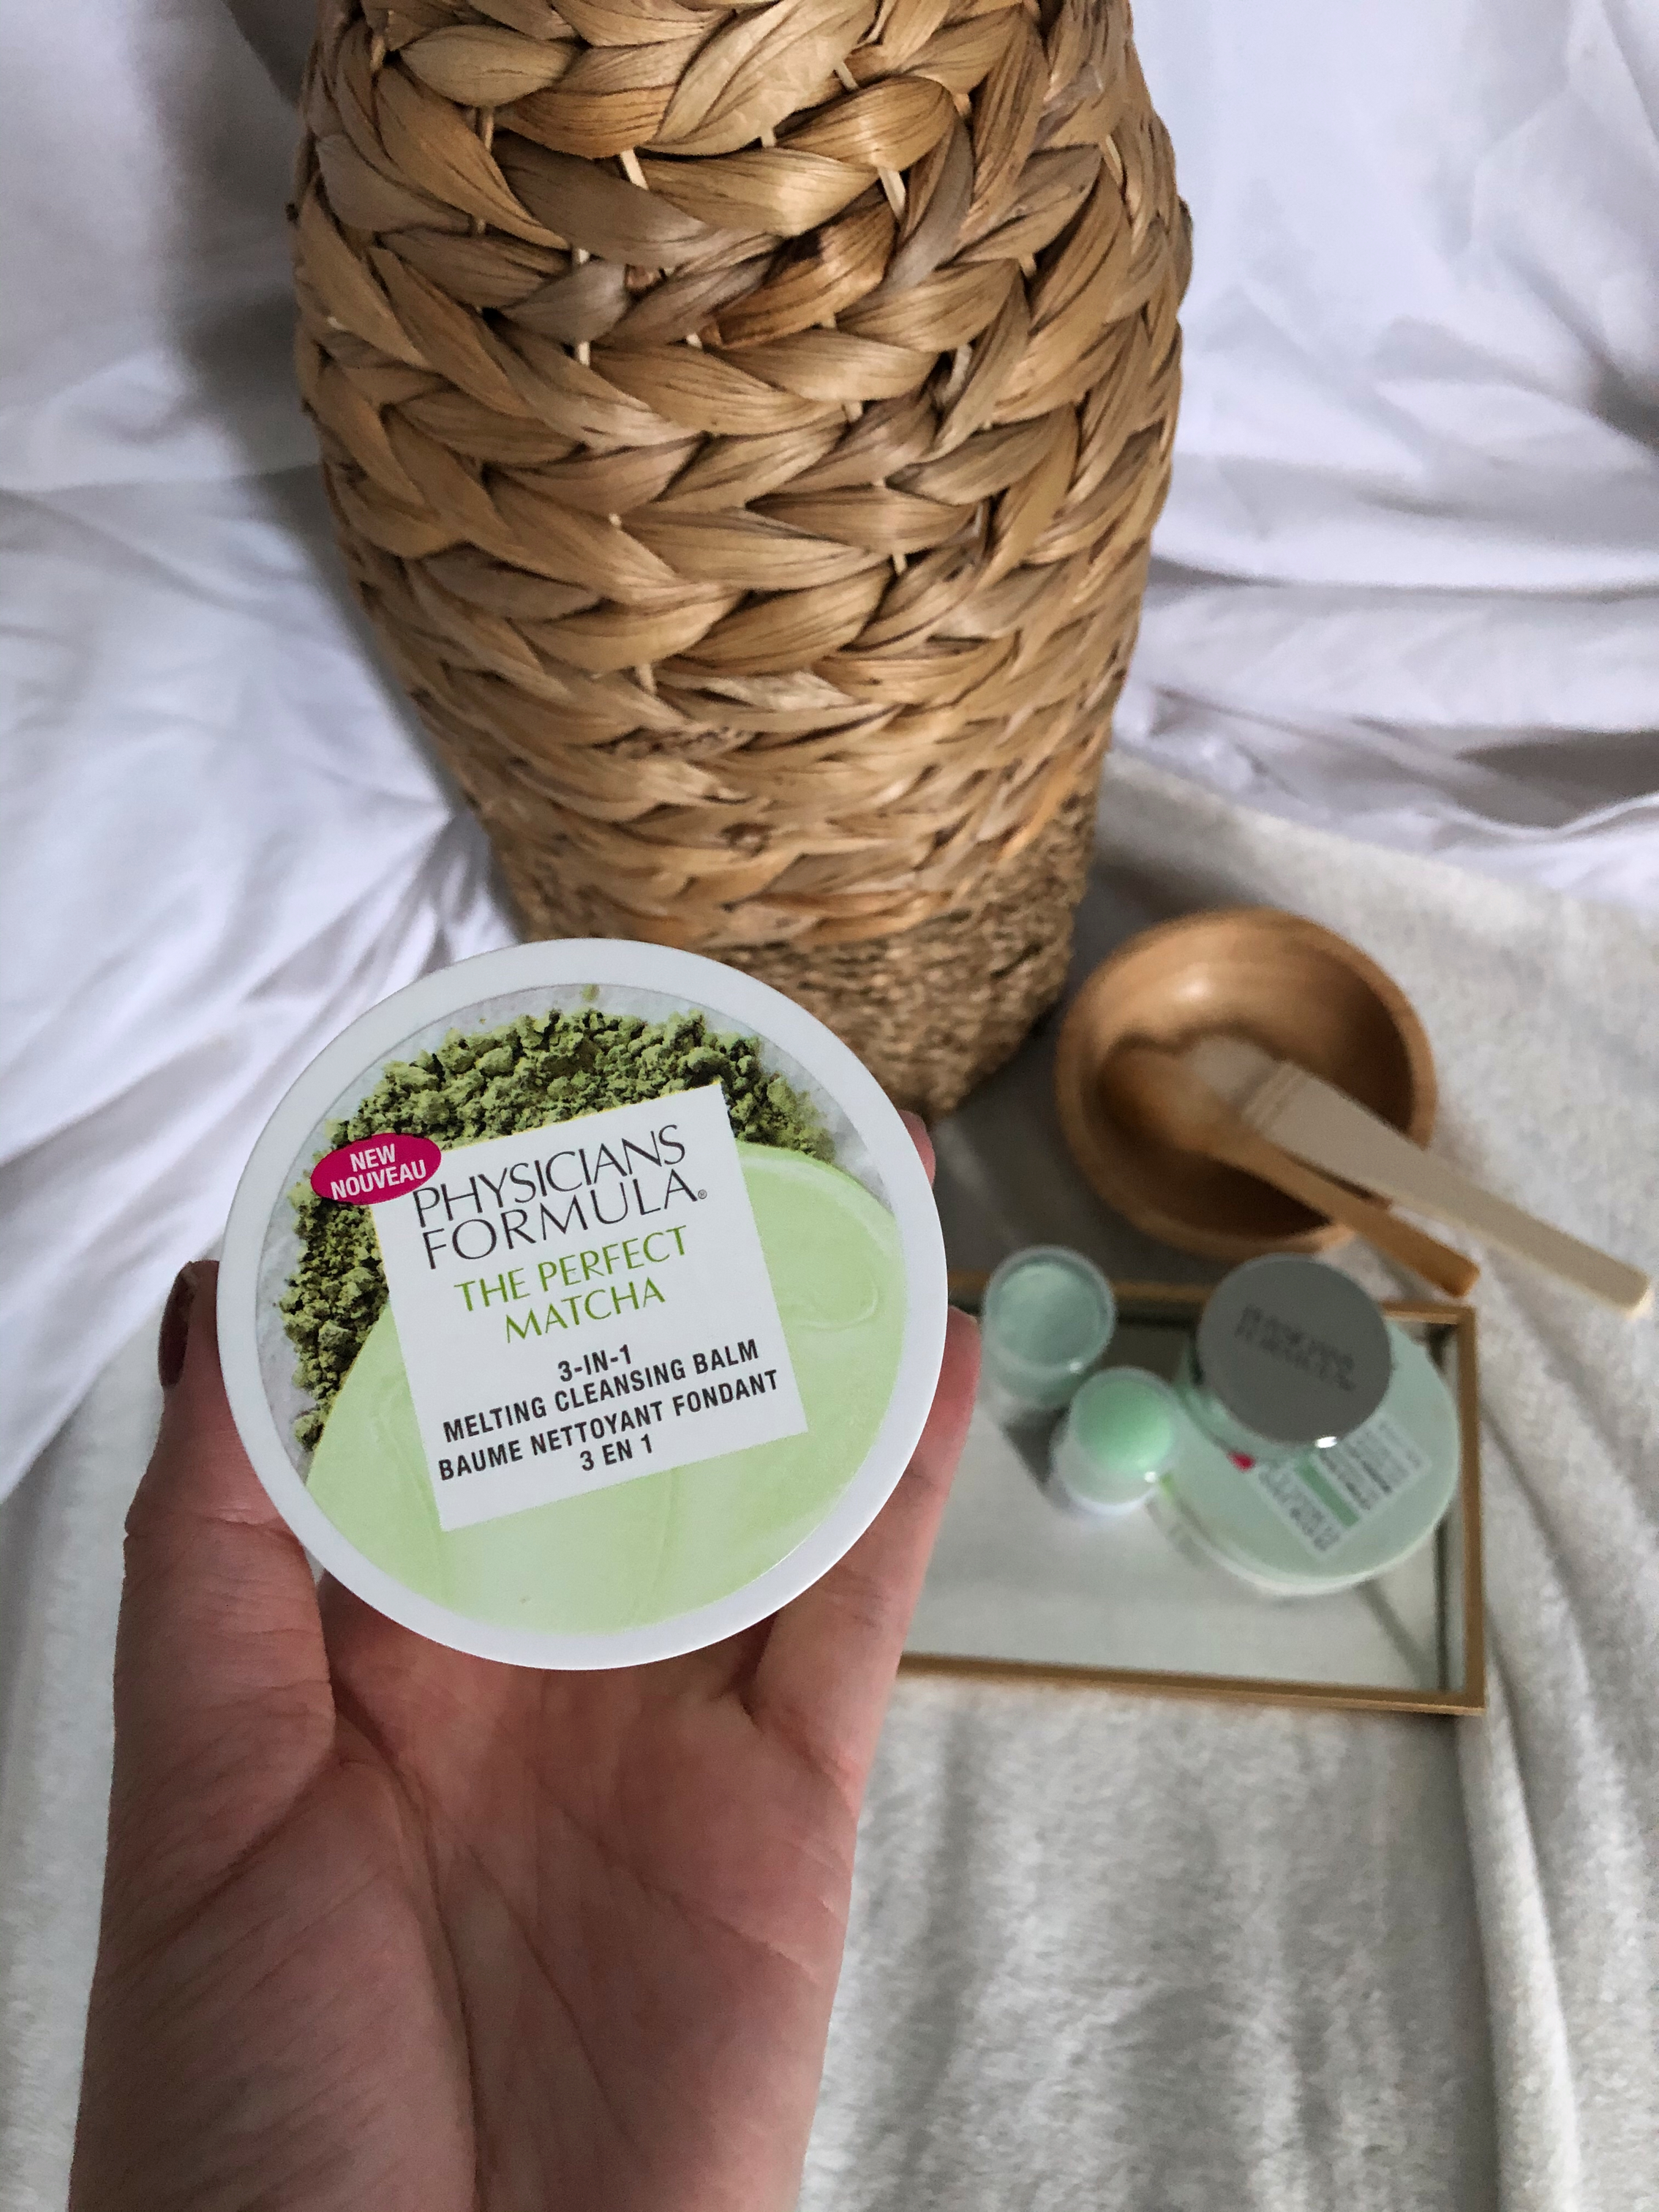 Physicians Formula The Perfect Matcha 3-in-1 Melting Cleansing Balm. Physicians Formula Skin Care Reviews.